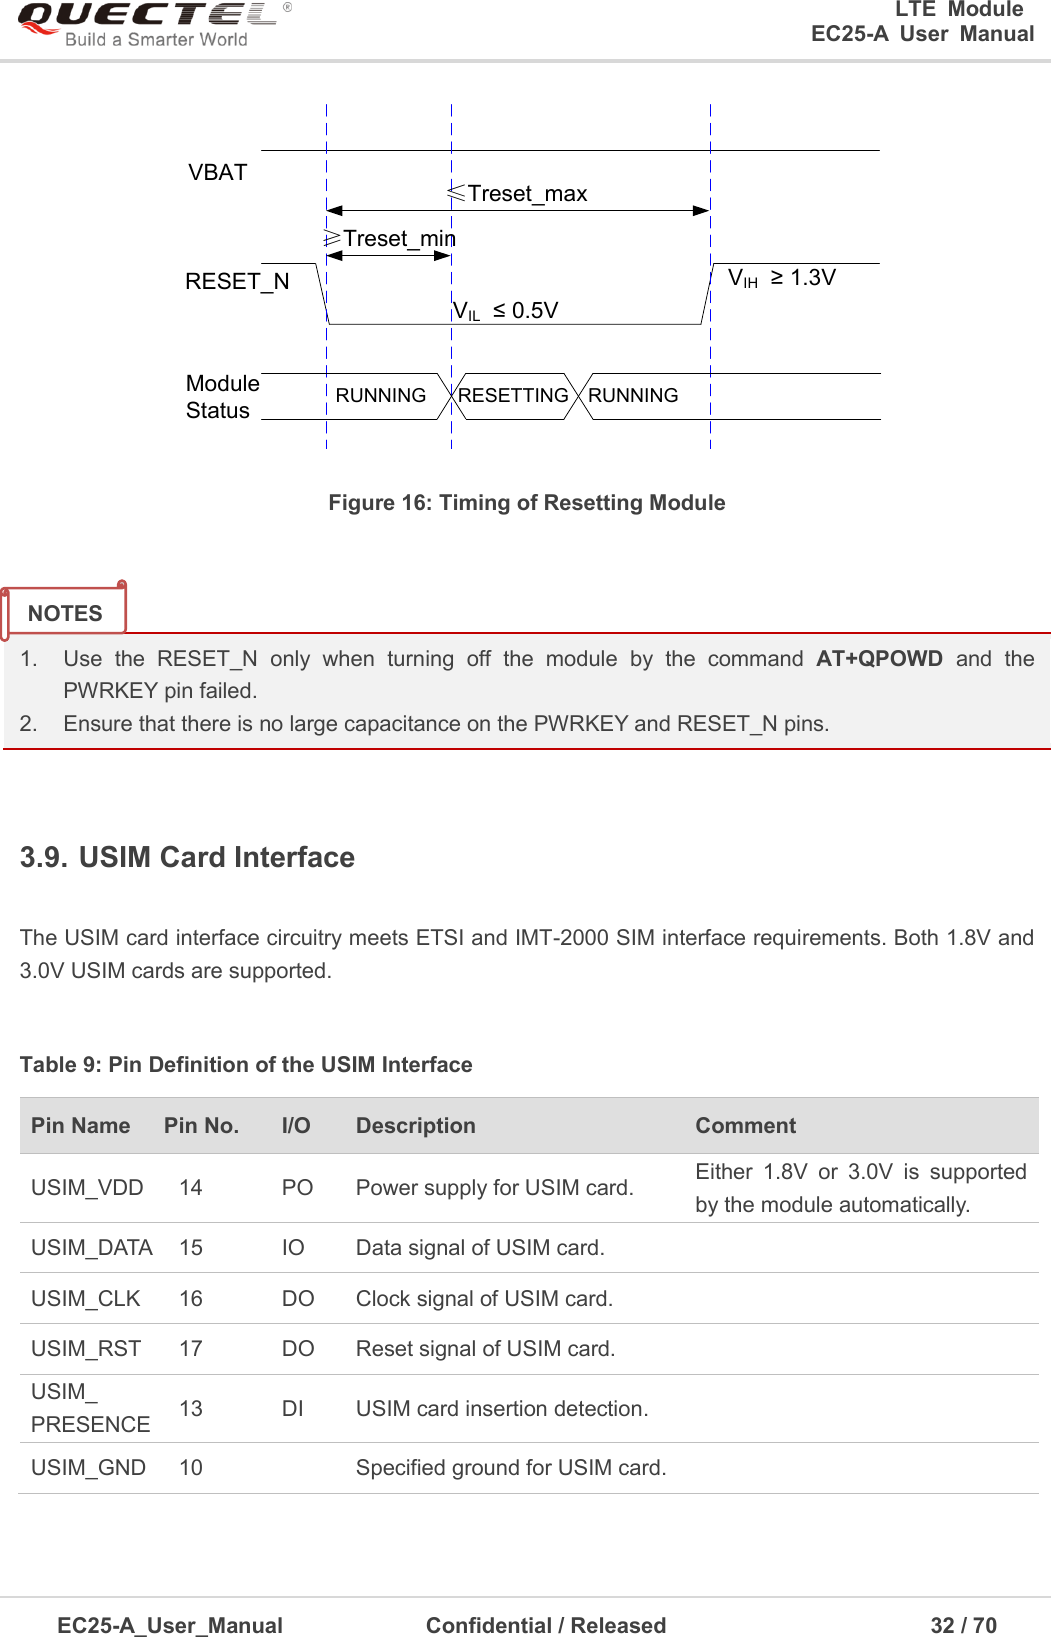 0      LTE  Module      EC25-A  User  Manual EC25-A_User_Manual  Confidential / Released      32 / 7  VIL  ≤ 0.5VVIH  ≥ 1.3VVBAT≥Treset_minRESETTINGModule Status RUNNINGRESET_NRUNNING≤Treset_maxFigure 16: Timing of Resetting Module 1. Use  the  RESET_N  only  when  turning  off  the  module  by  the  command  AT+QPOWD  and  thePWRKEY pin failed.2. Ensure that there is no large capacitance on the PWRKEY and RESET_N pins.3.9. USIM Card Interface The USIM card interface circuitry meets ETSI and IMT-2000 SIM interface requirements. Both 1.8V and 3.0V USIM cards are supported.   Table 9: Pin Definition of the USIM Interface Pin Name Pin No. I/O Description Comment USIM_VDD 14 PO Power supply for USIM card. Either  1.8V  or  3.0V  is  supported by the module automatically. USIM_DATA 15 IO Data signal of USIM card. USIM_CLK 16 DO Clock signal of USIM card. USIM_RST 17 DO Reset signal of USIM card. USIM_ PRESENCE 13 DI USIM card insertion detection. USIM_GND 10 Specified ground for USIM card. NOTES 